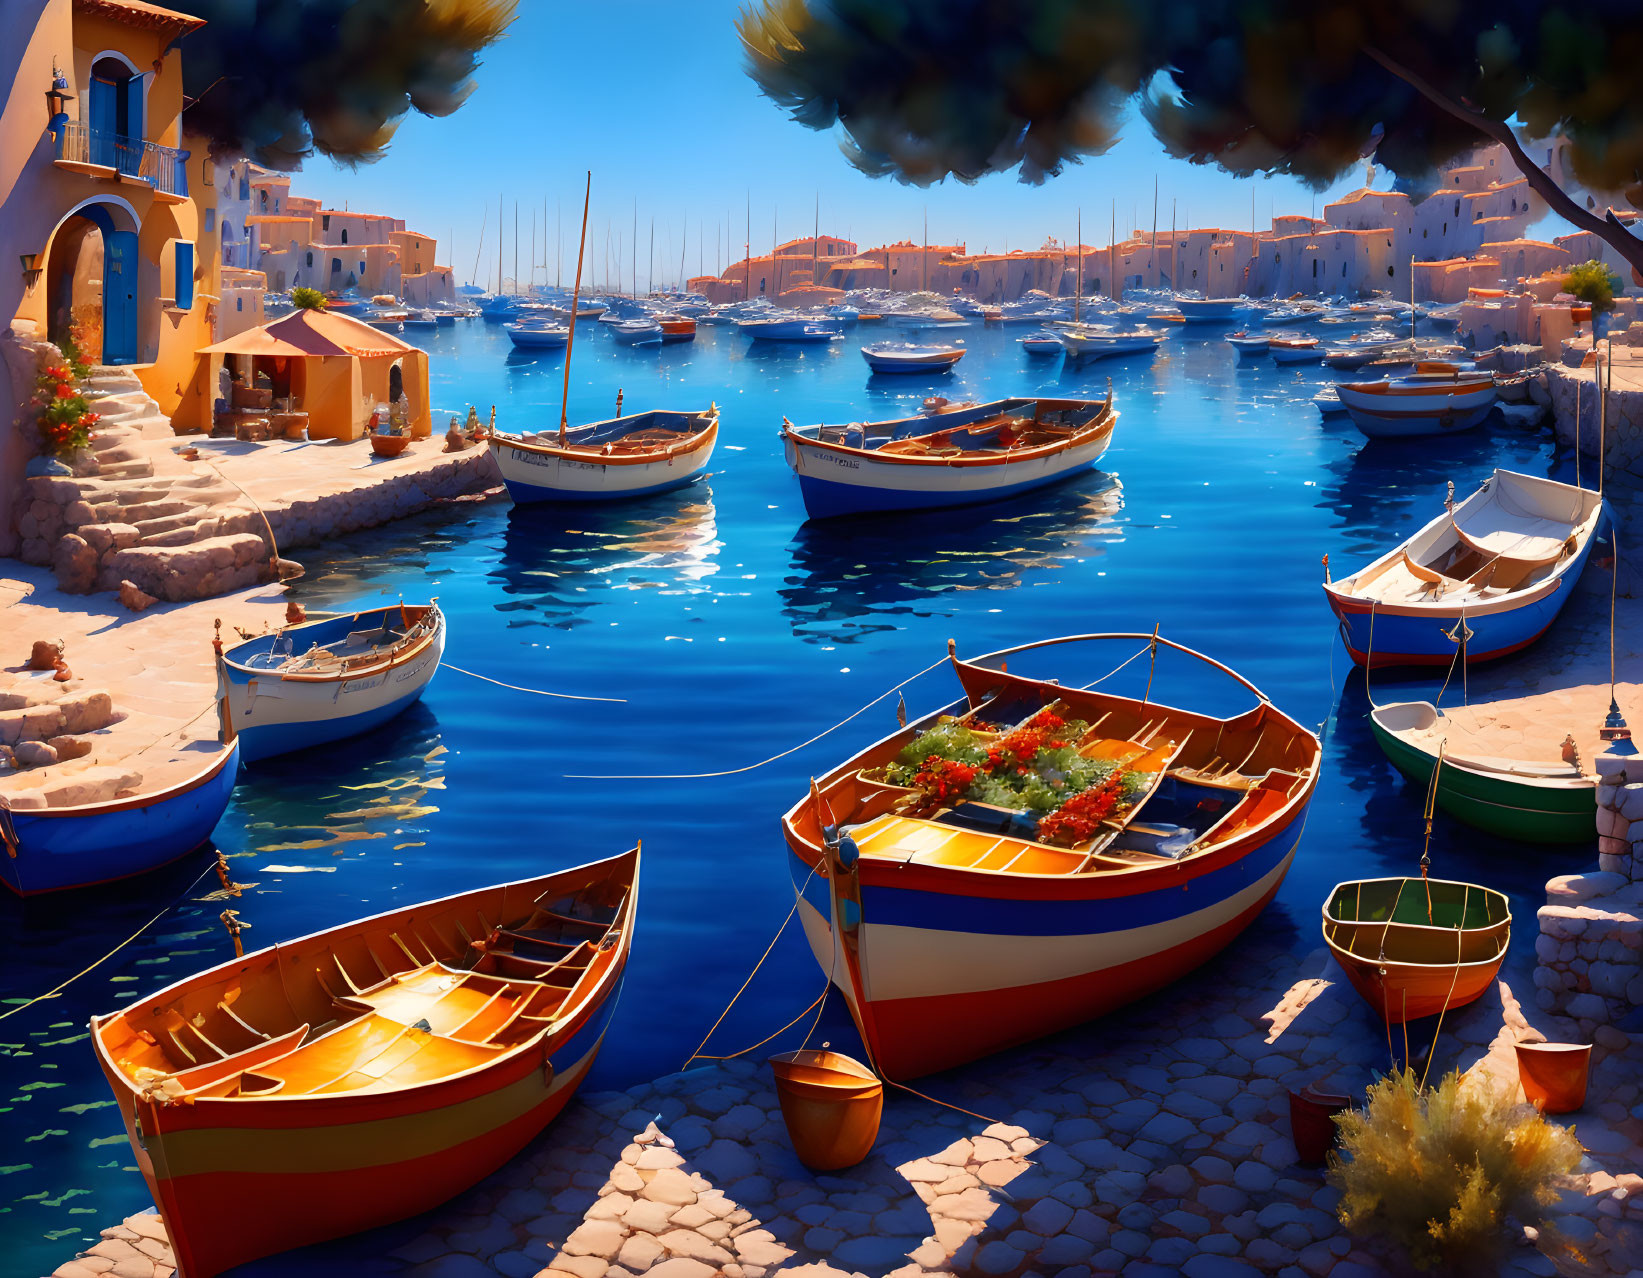 Colorful boats on serene water near charming town with white buildings and terracotta roofs under blue sky